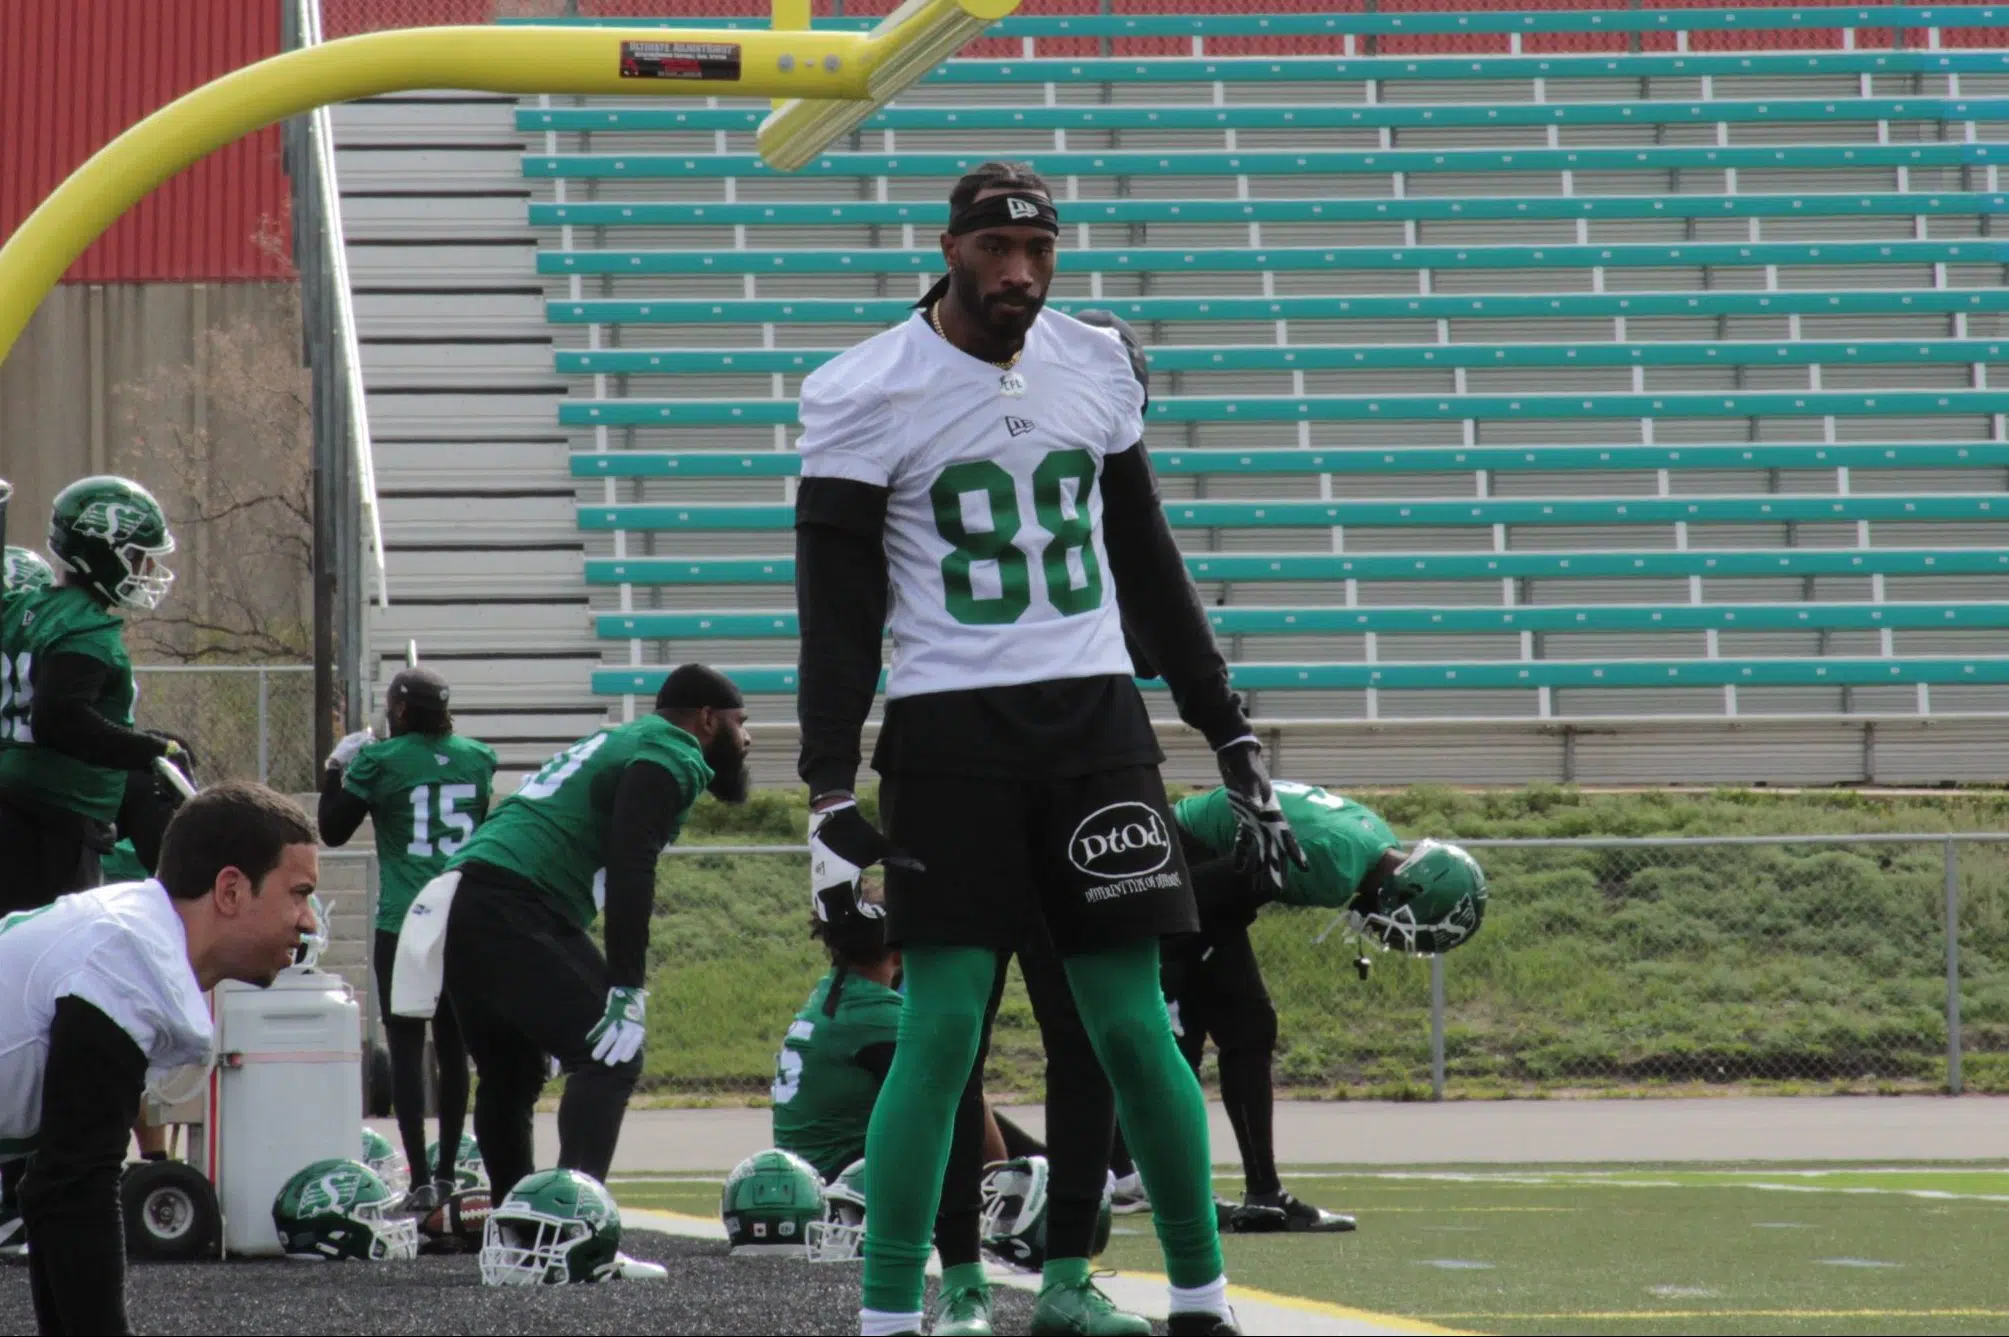 McRoberts among nine players released by Roughriders